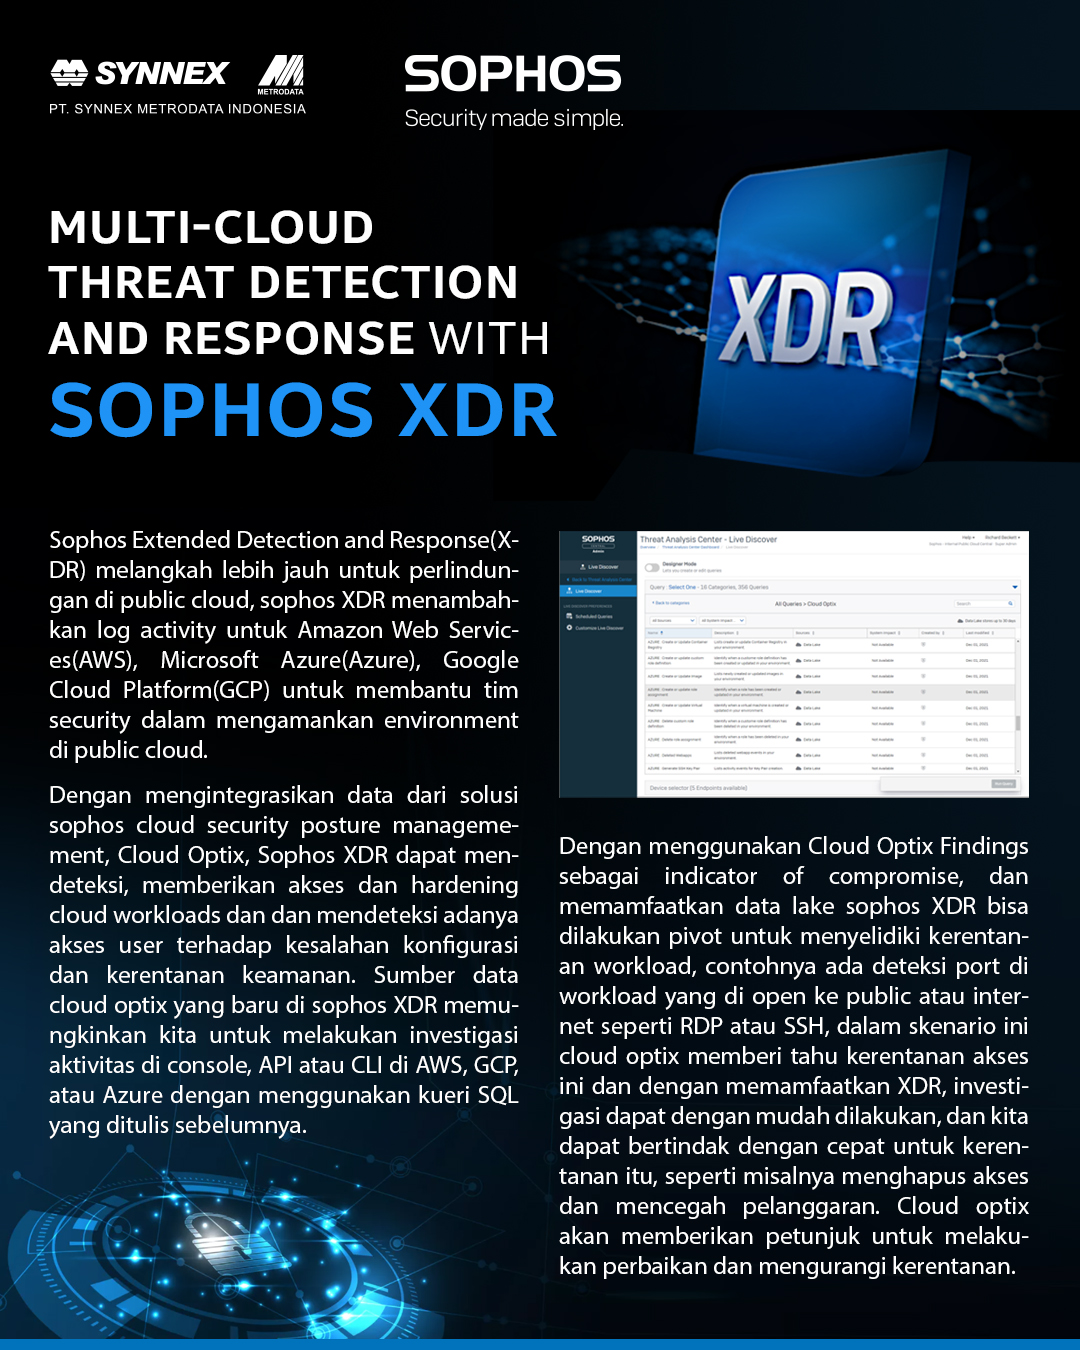 Multi-cloud Threat Detection and Response with Sophos XDR